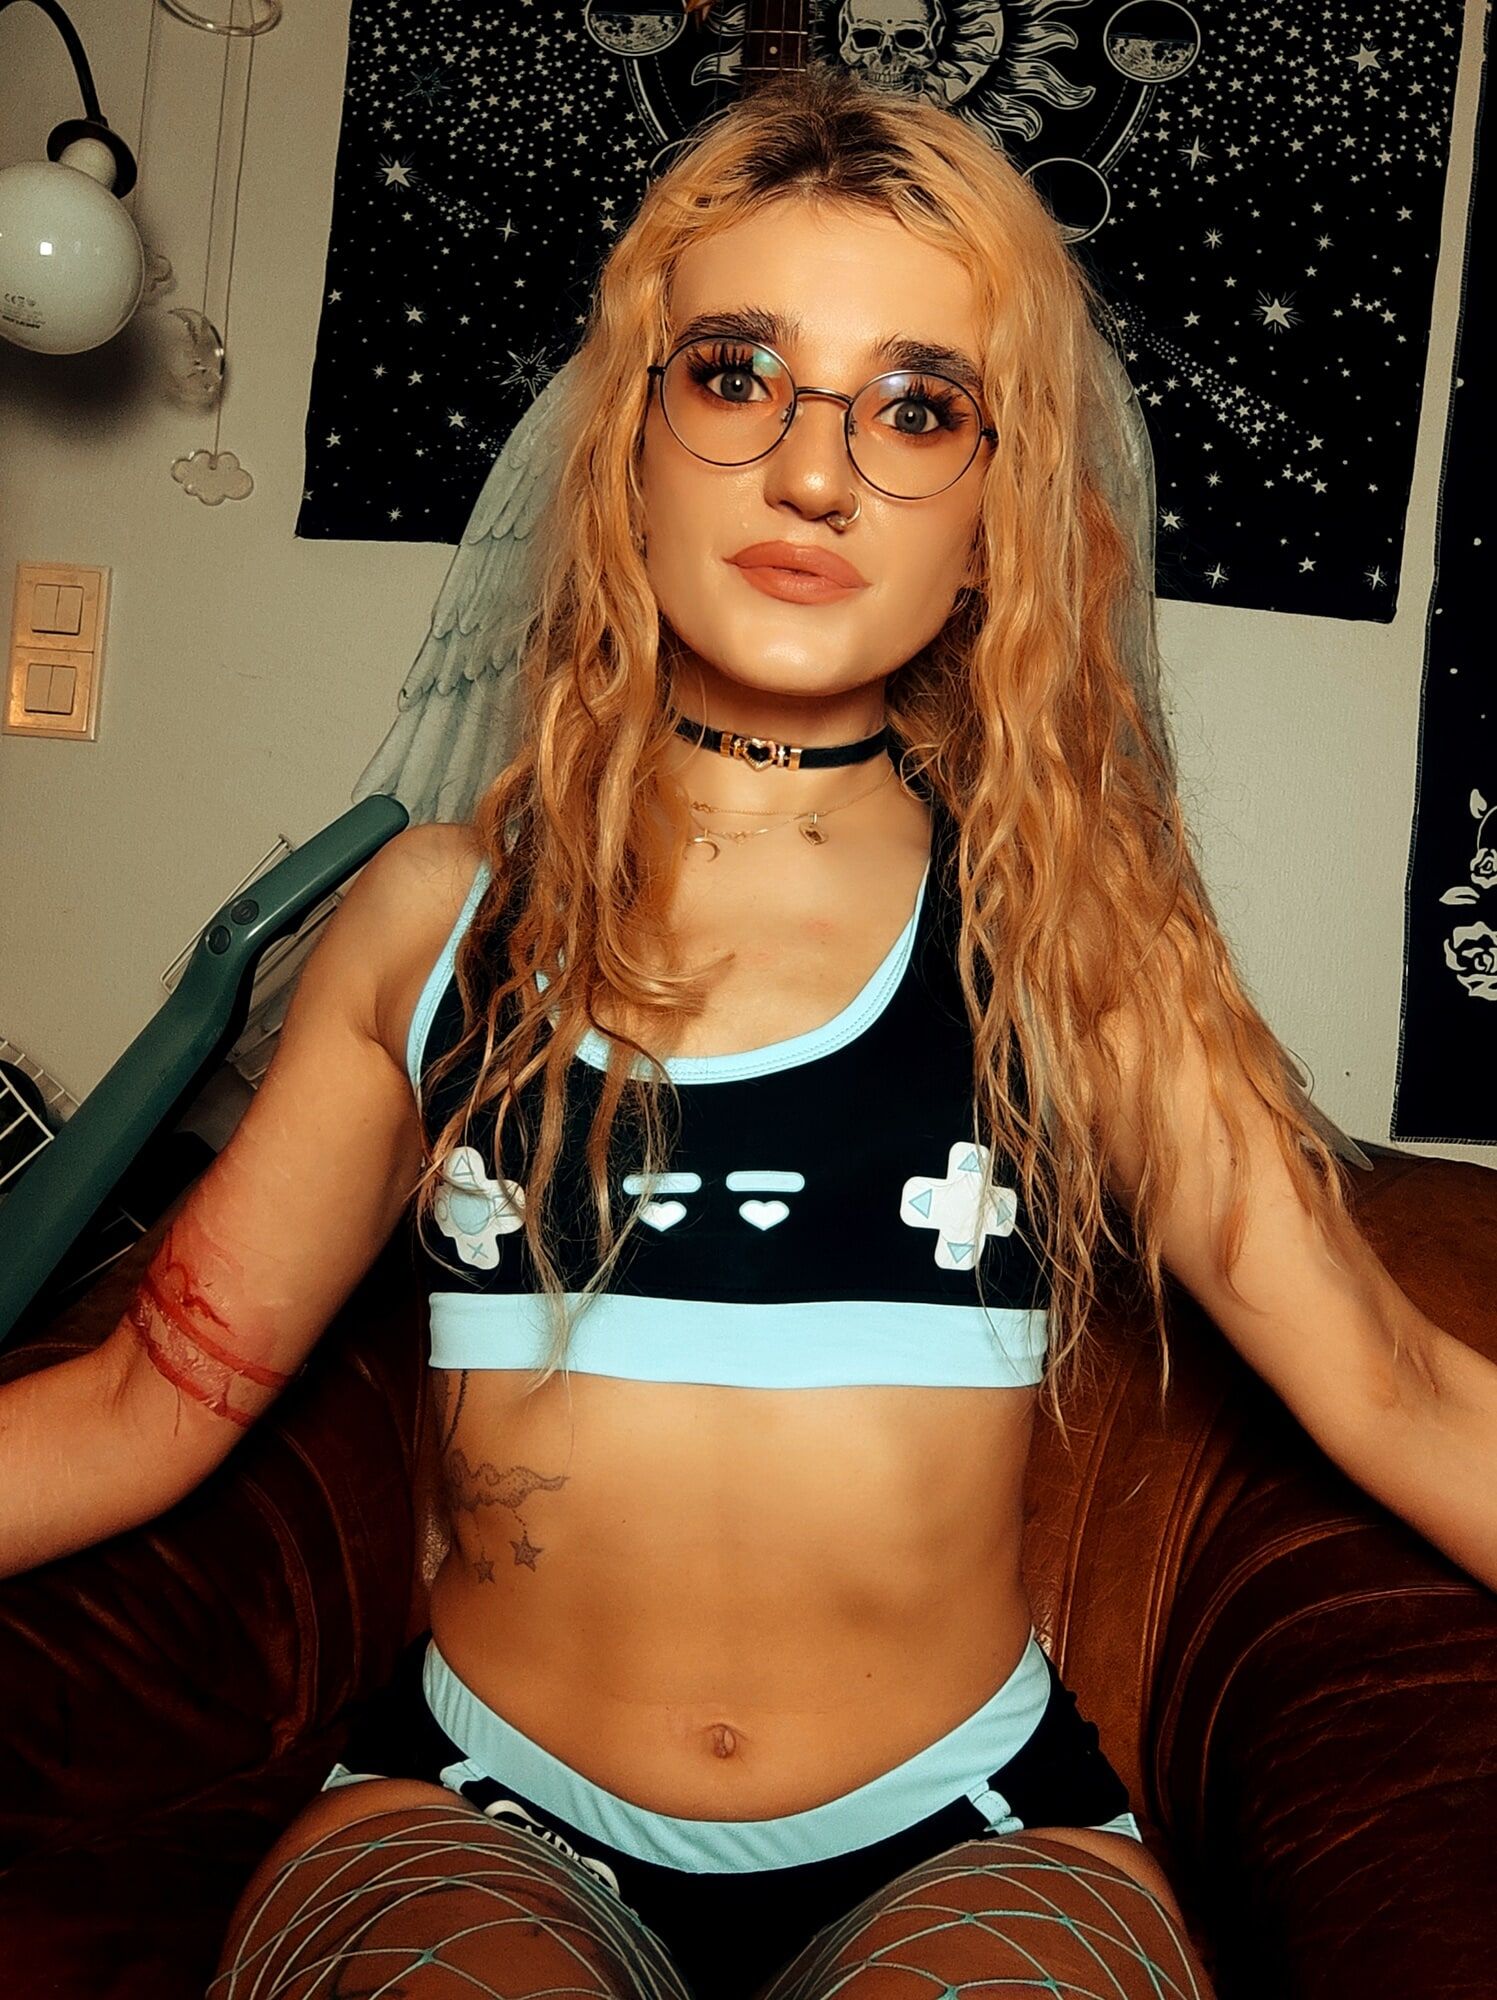 Nerdy gamer girl with glasses #6